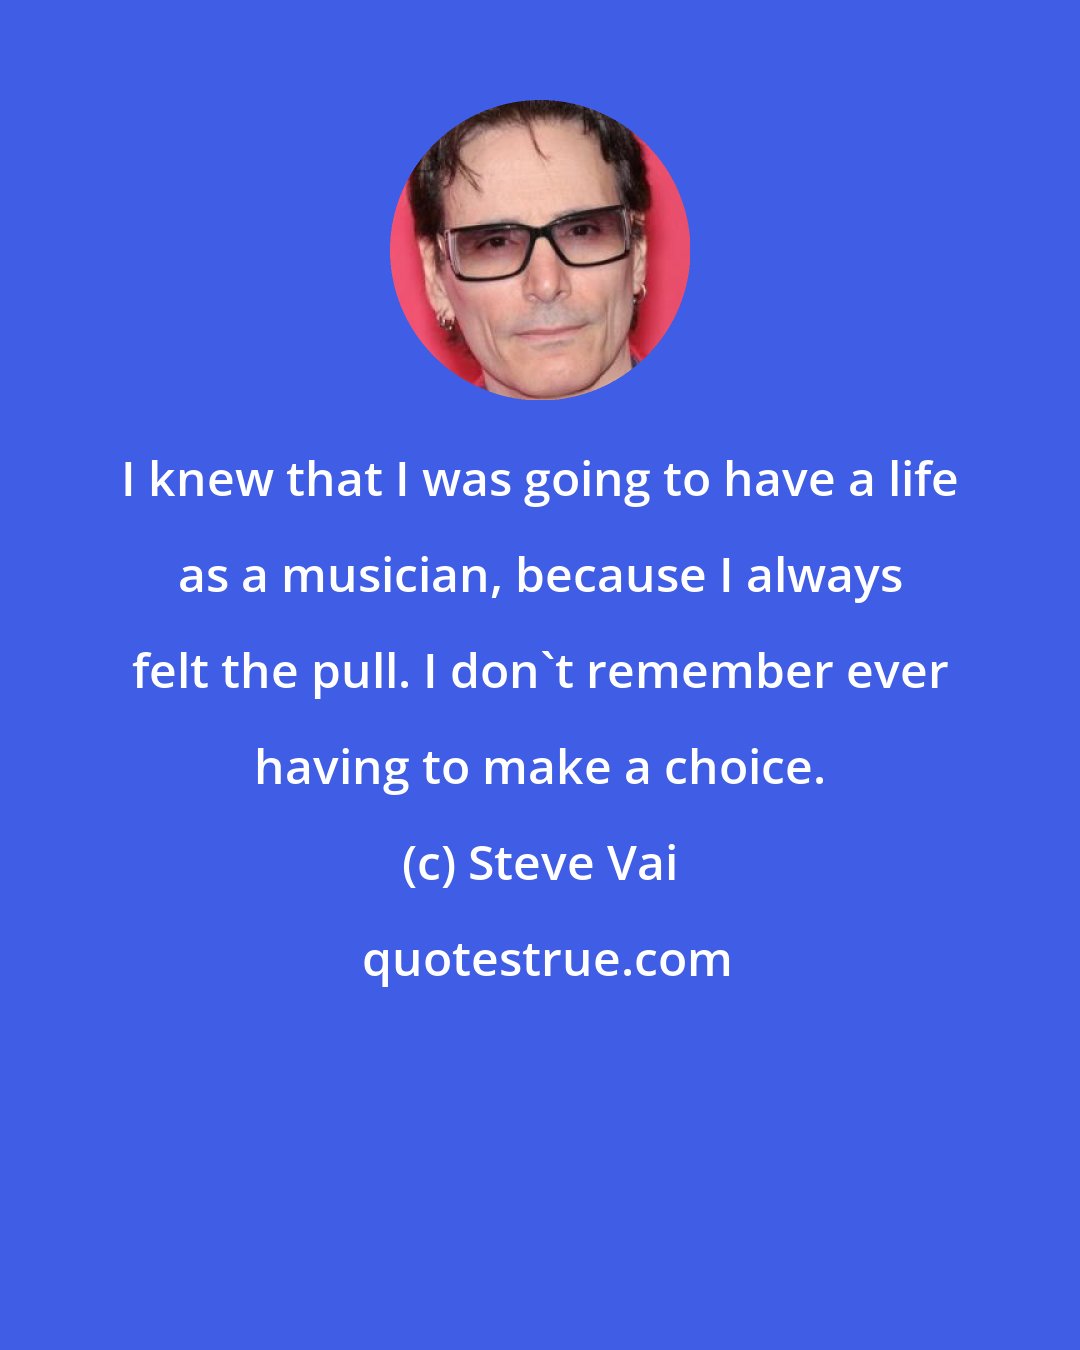 Steve Vai: I knew that I was going to have a life as a musician, because I always felt the pull. I don't remember ever having to make a choice.